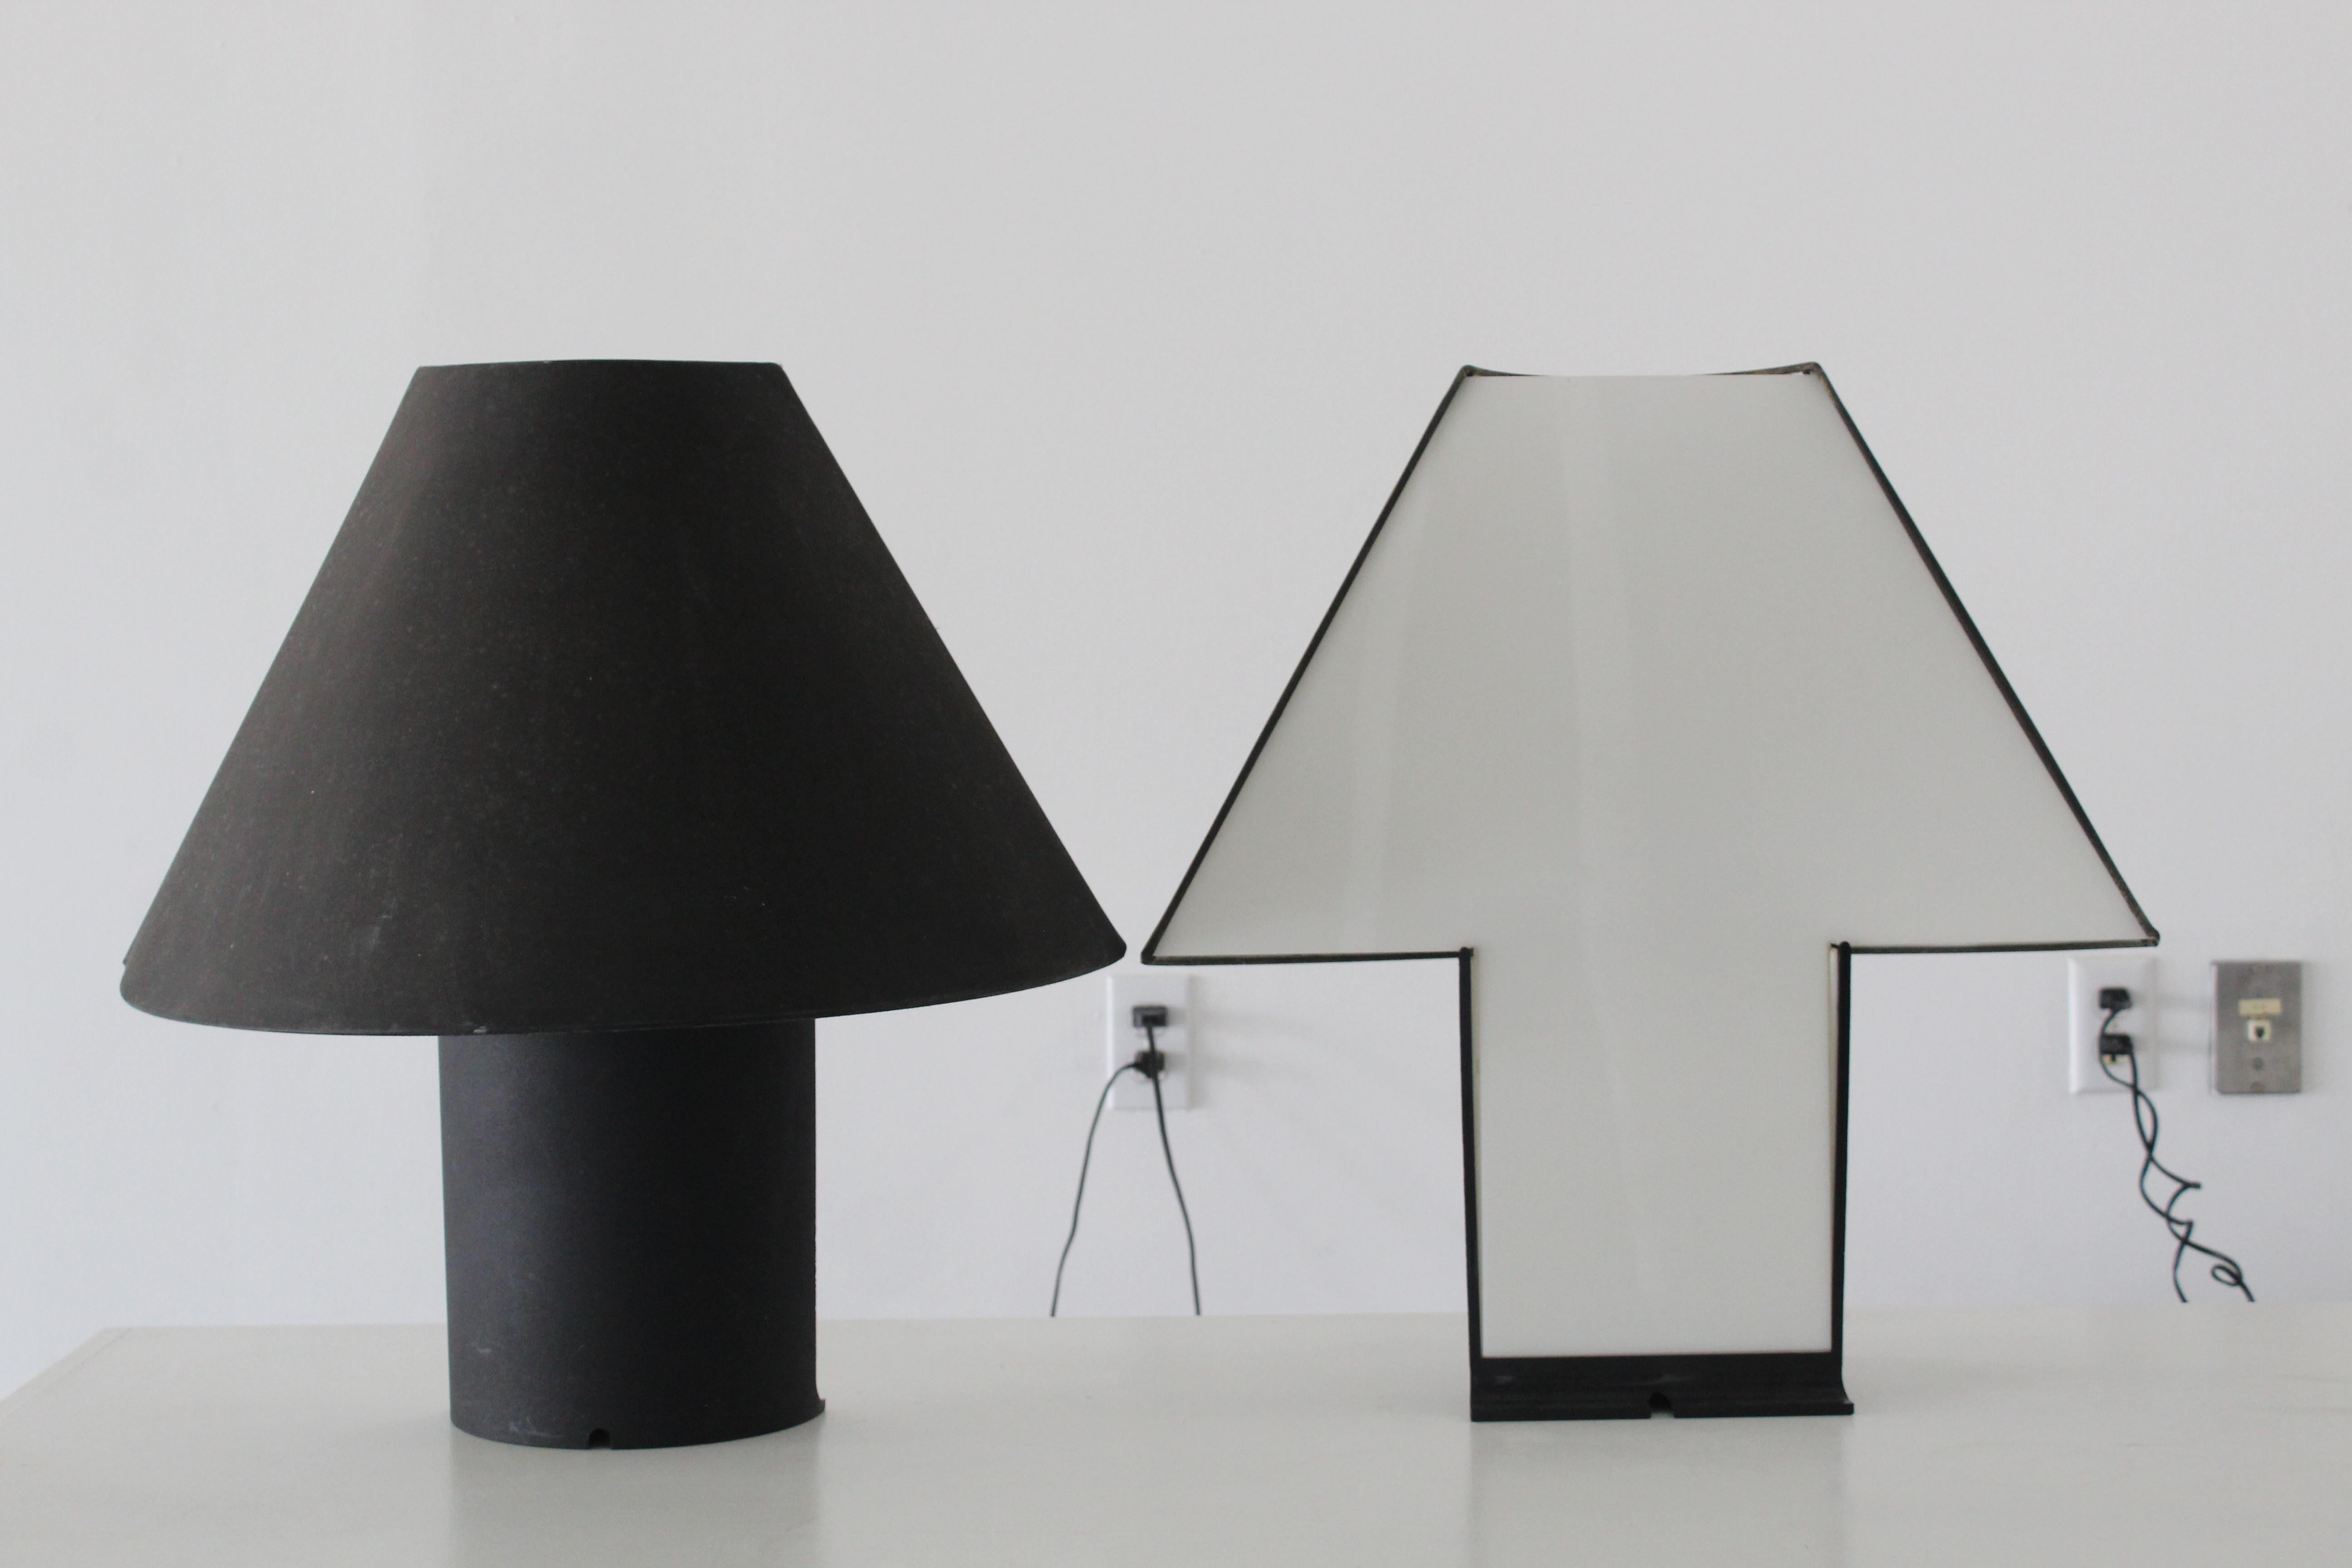 This amazing table lamp made by Mario Barbaglia & Marco Colombo for PAF Studio, 1980s, Italy
Lamp is in very good vintage condition. Made of white plexiglass and a black shade and base. Its the perfect addition to any space.